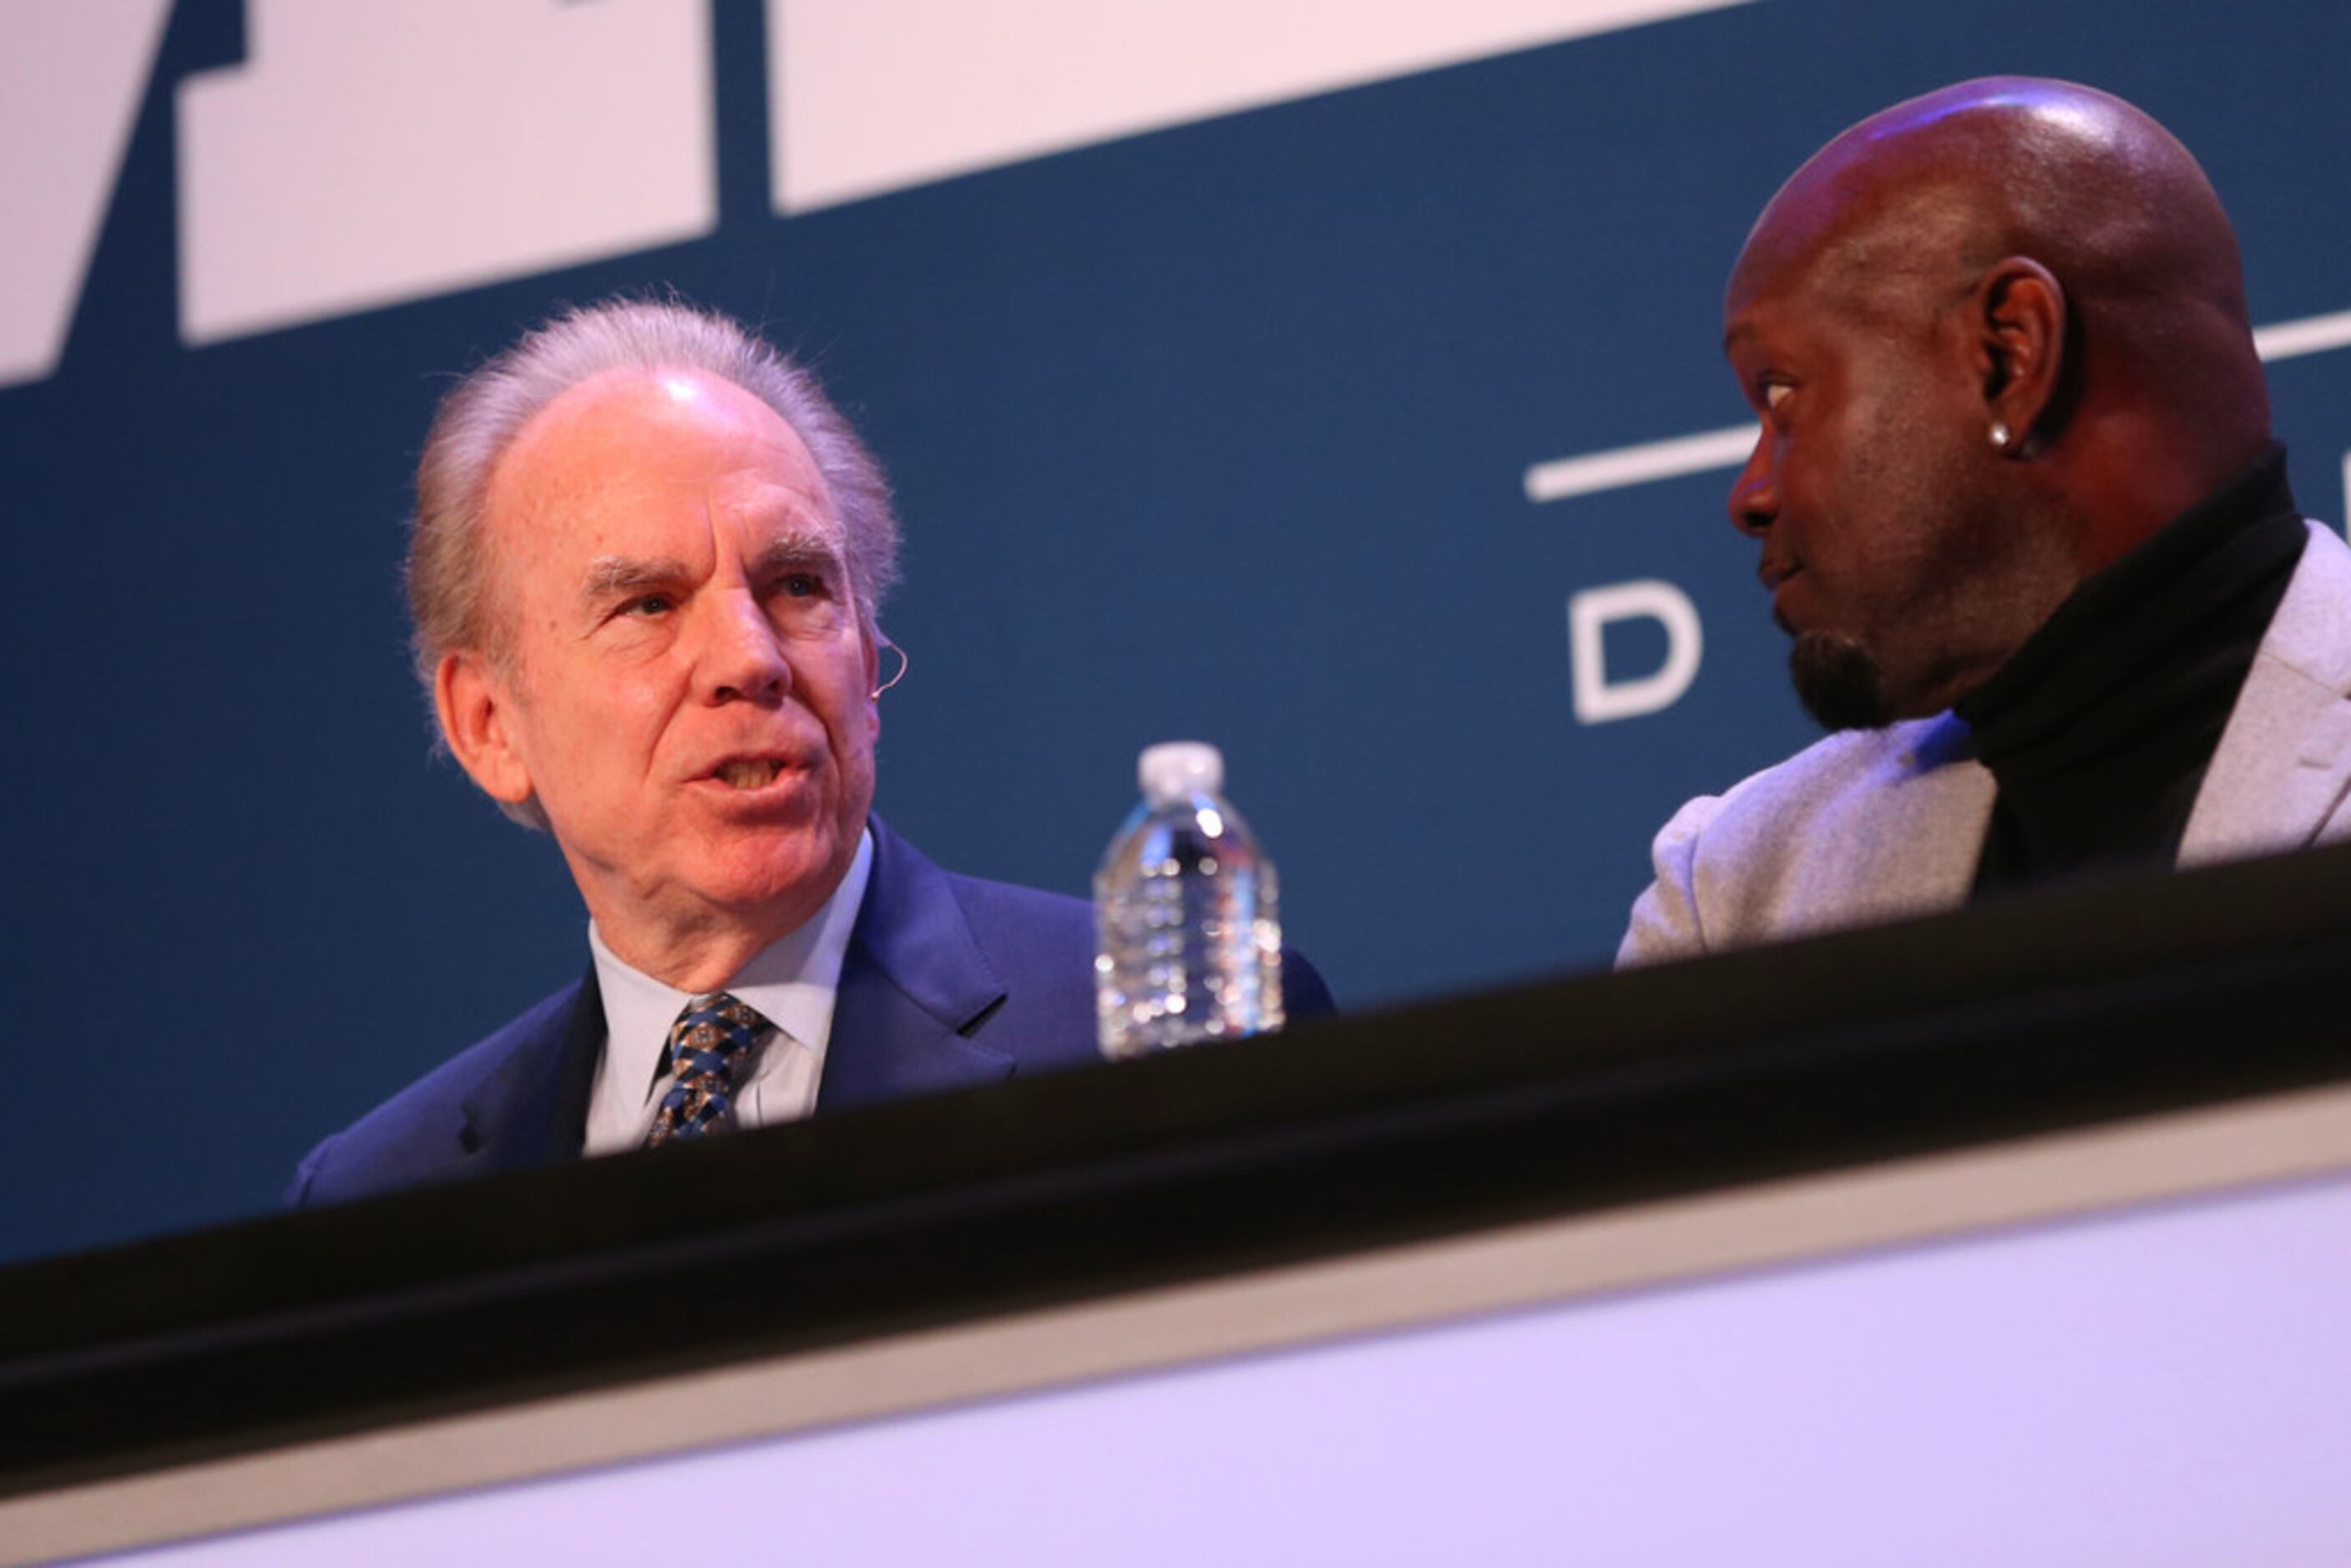 How Cowboys Hall of Famer Roger Staubach helped lure the Dallas